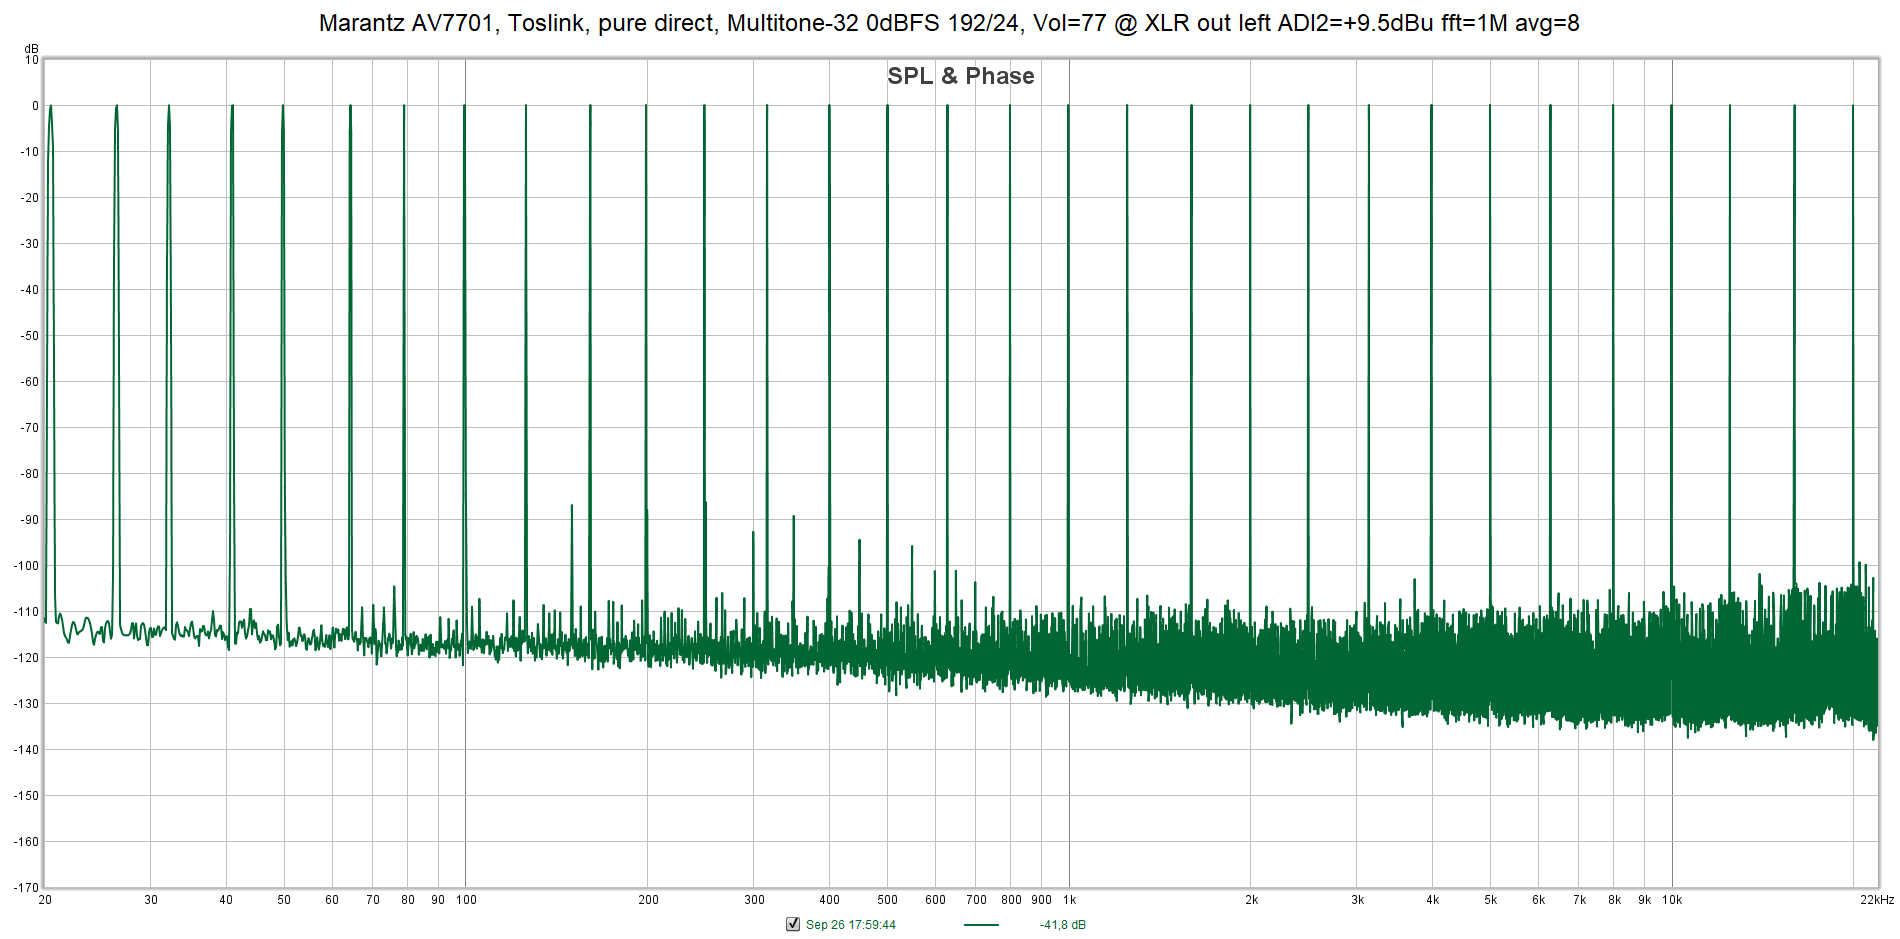 Multitone-32 192-24, Toslink pure direct Vol 77 @ XLR out left fft=1M avg=8.png